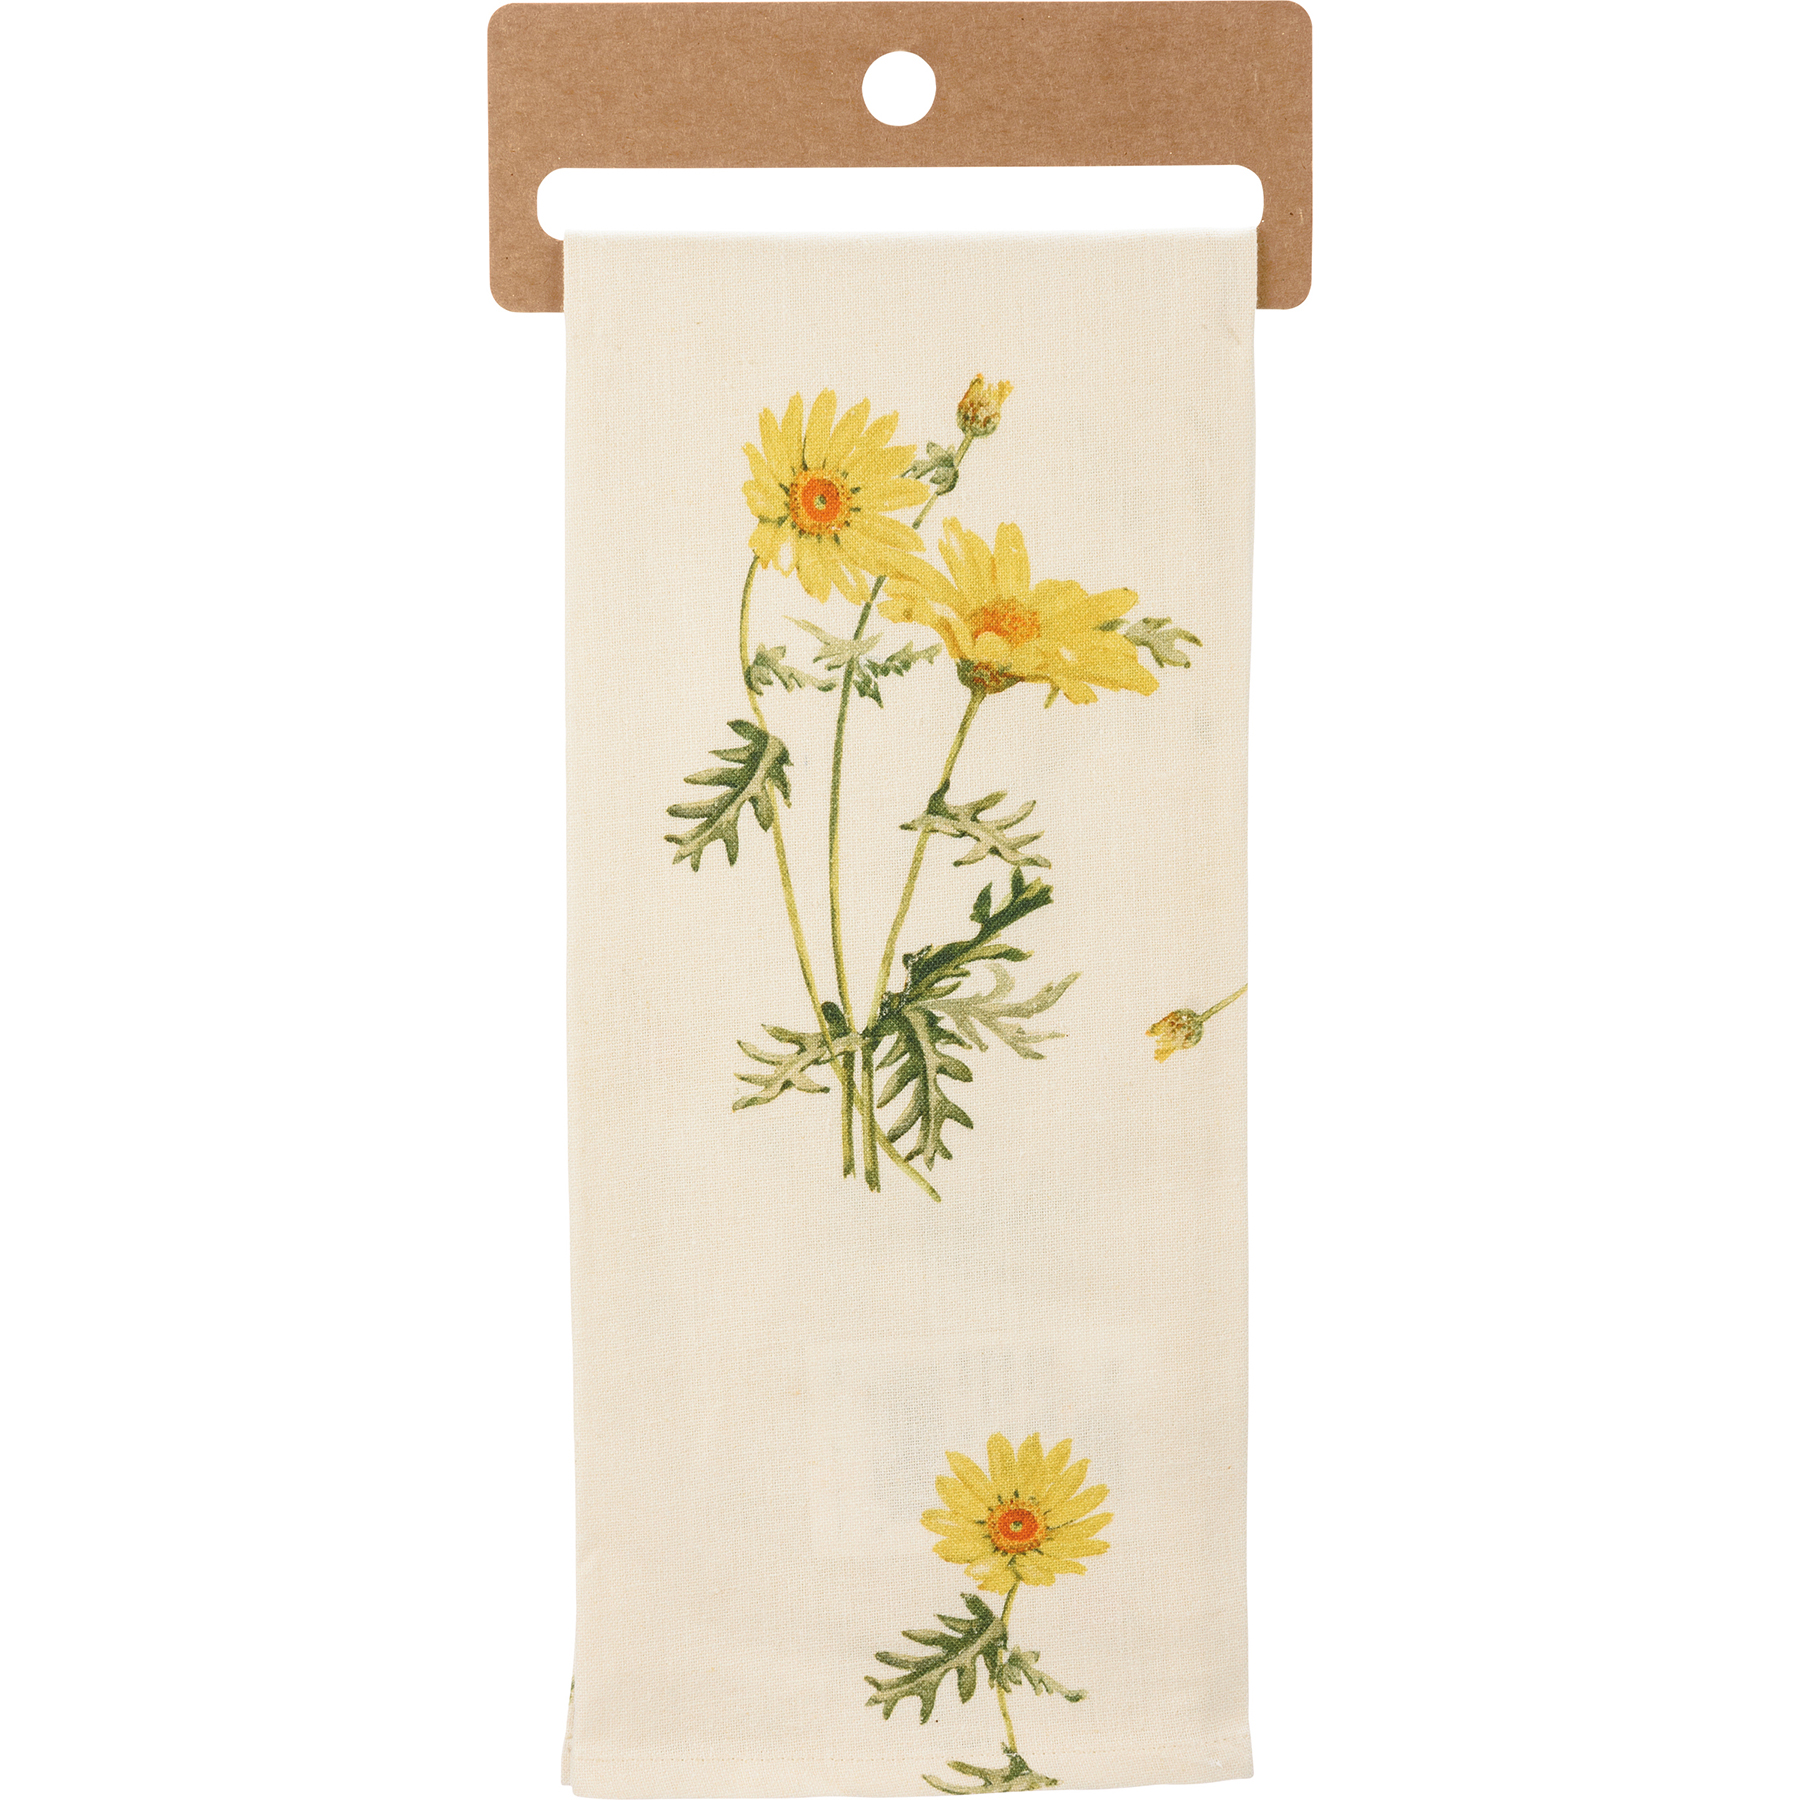 Daisy Pickup Truck Sunshine In My Soul Happy Day Farm Cotton Kitchen Dish  Towel Set from Primitives by Kathy - Cherryland Sales